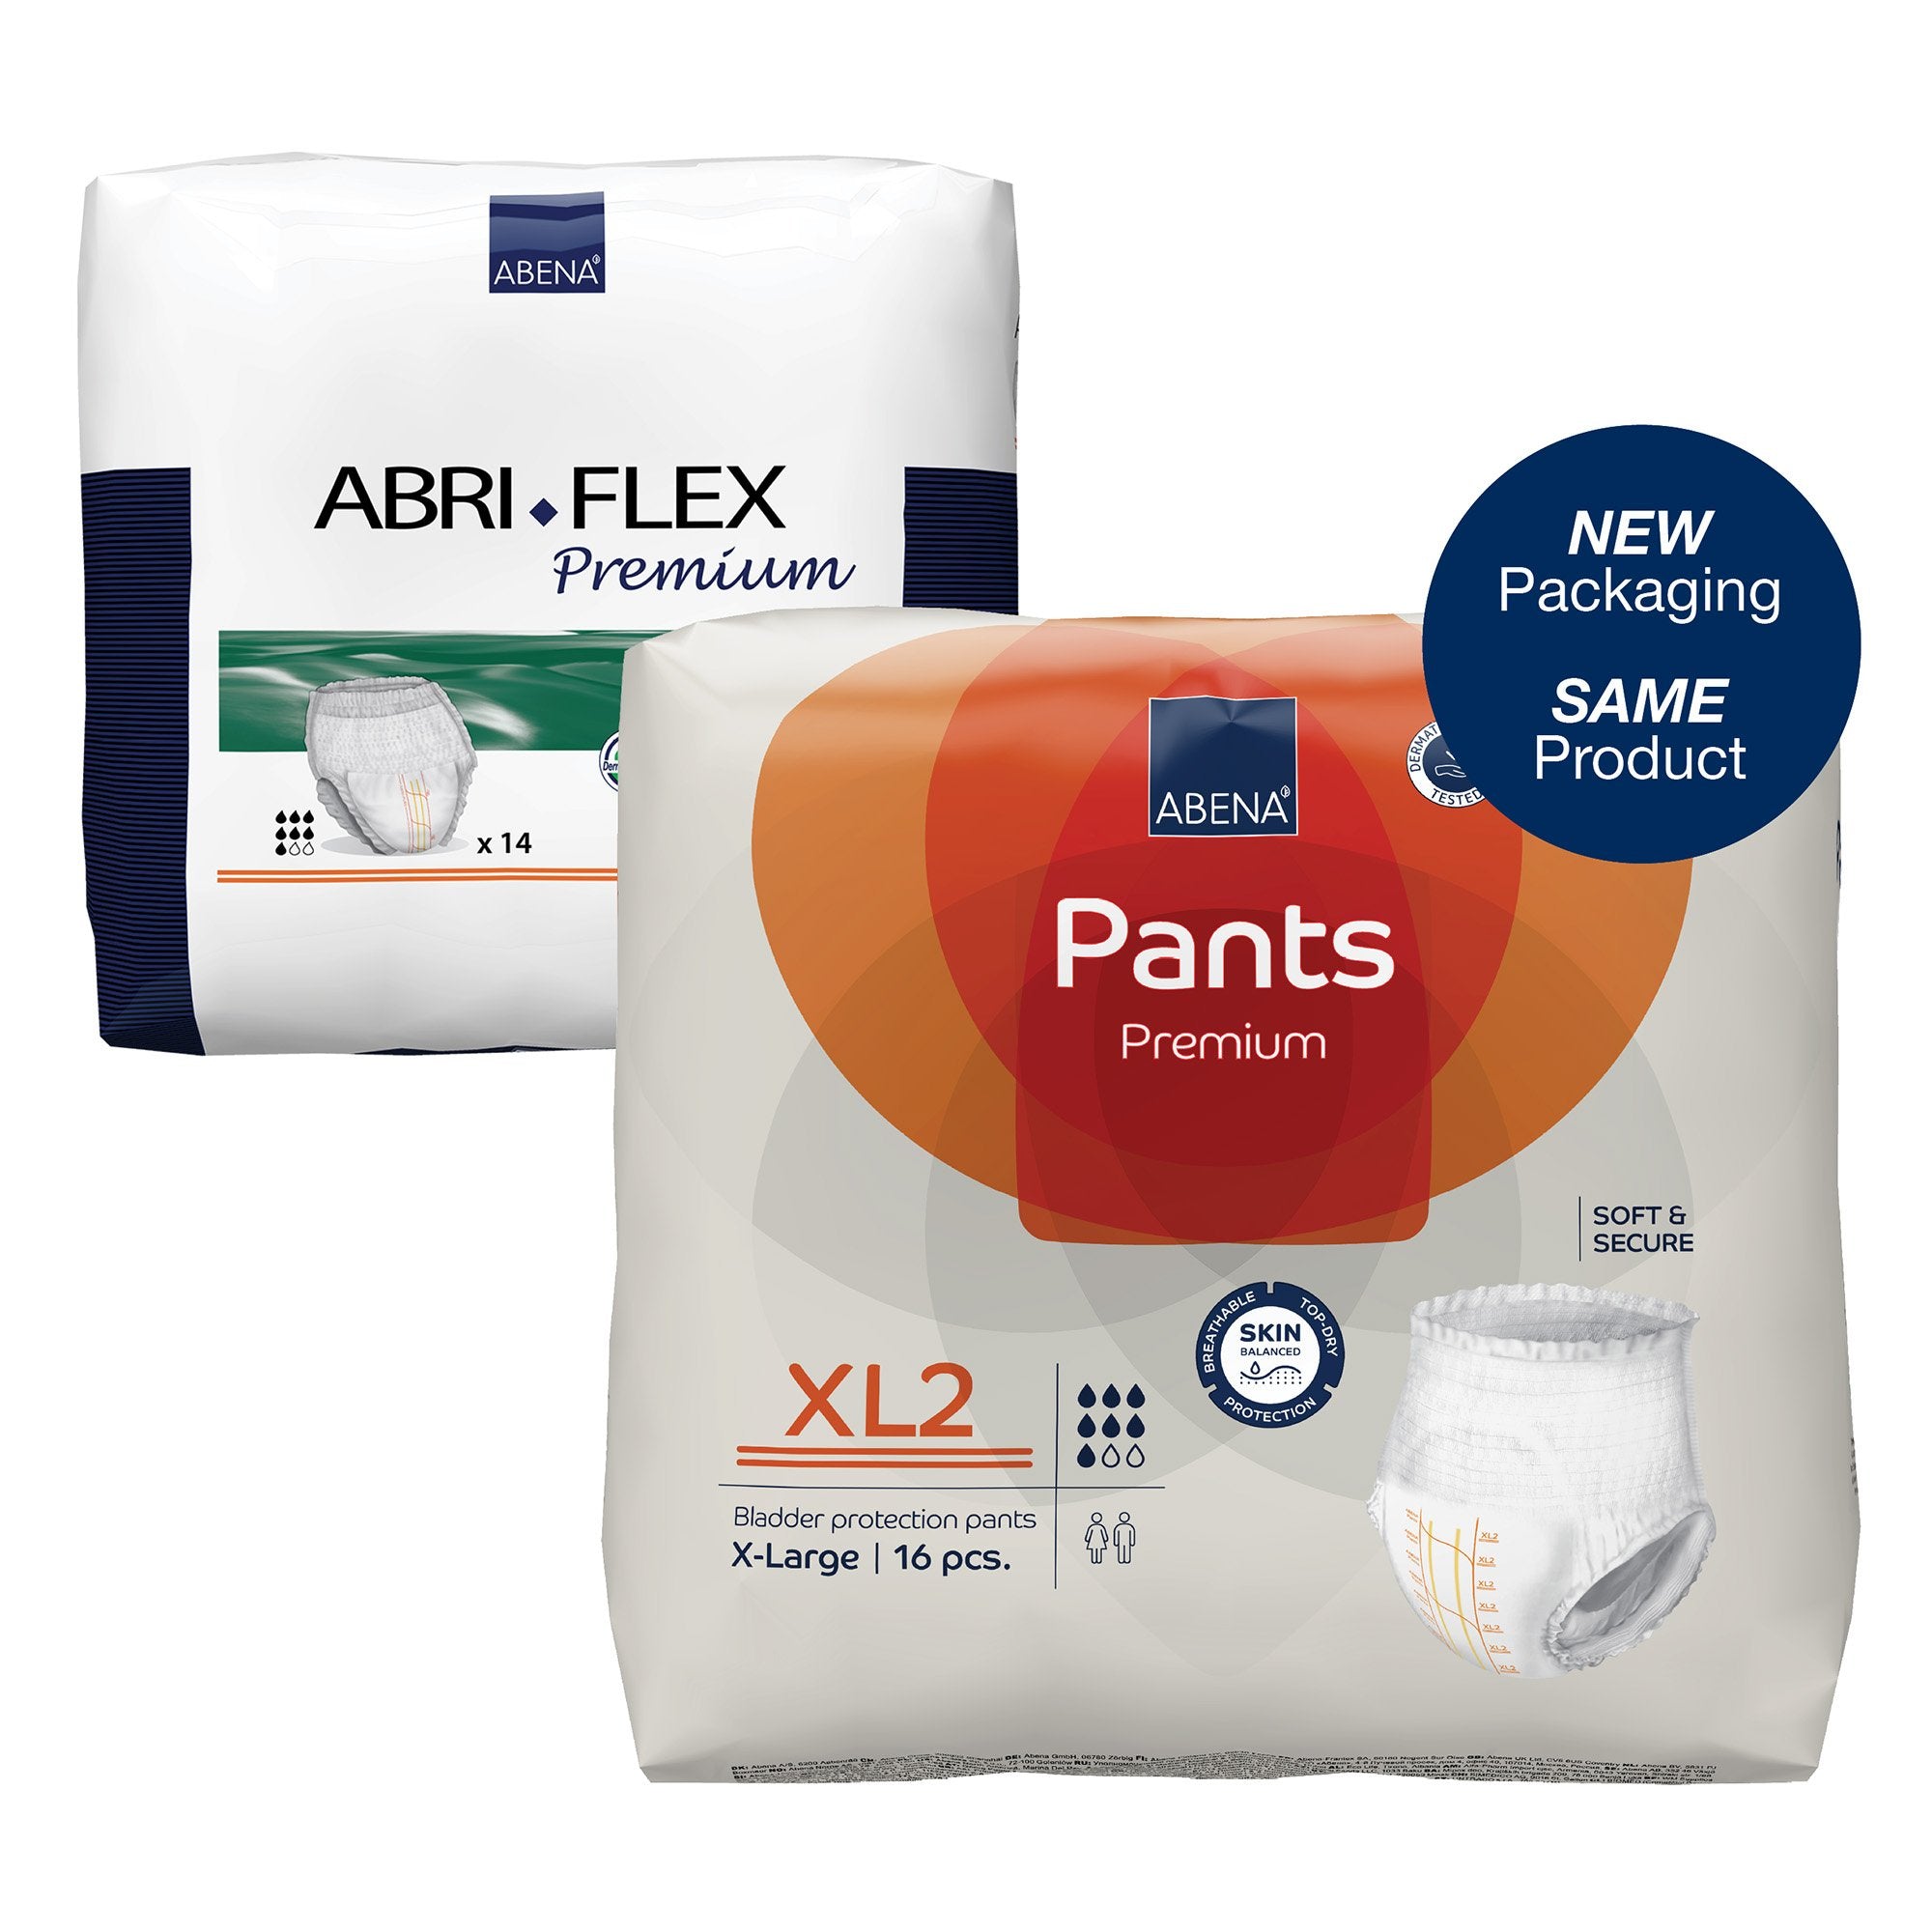 Unisex Adult Absorbent Underwear Abena Premium Pants XL2 Pull On with Tear Away Seams X-Large Disposable Moderate Absorbency